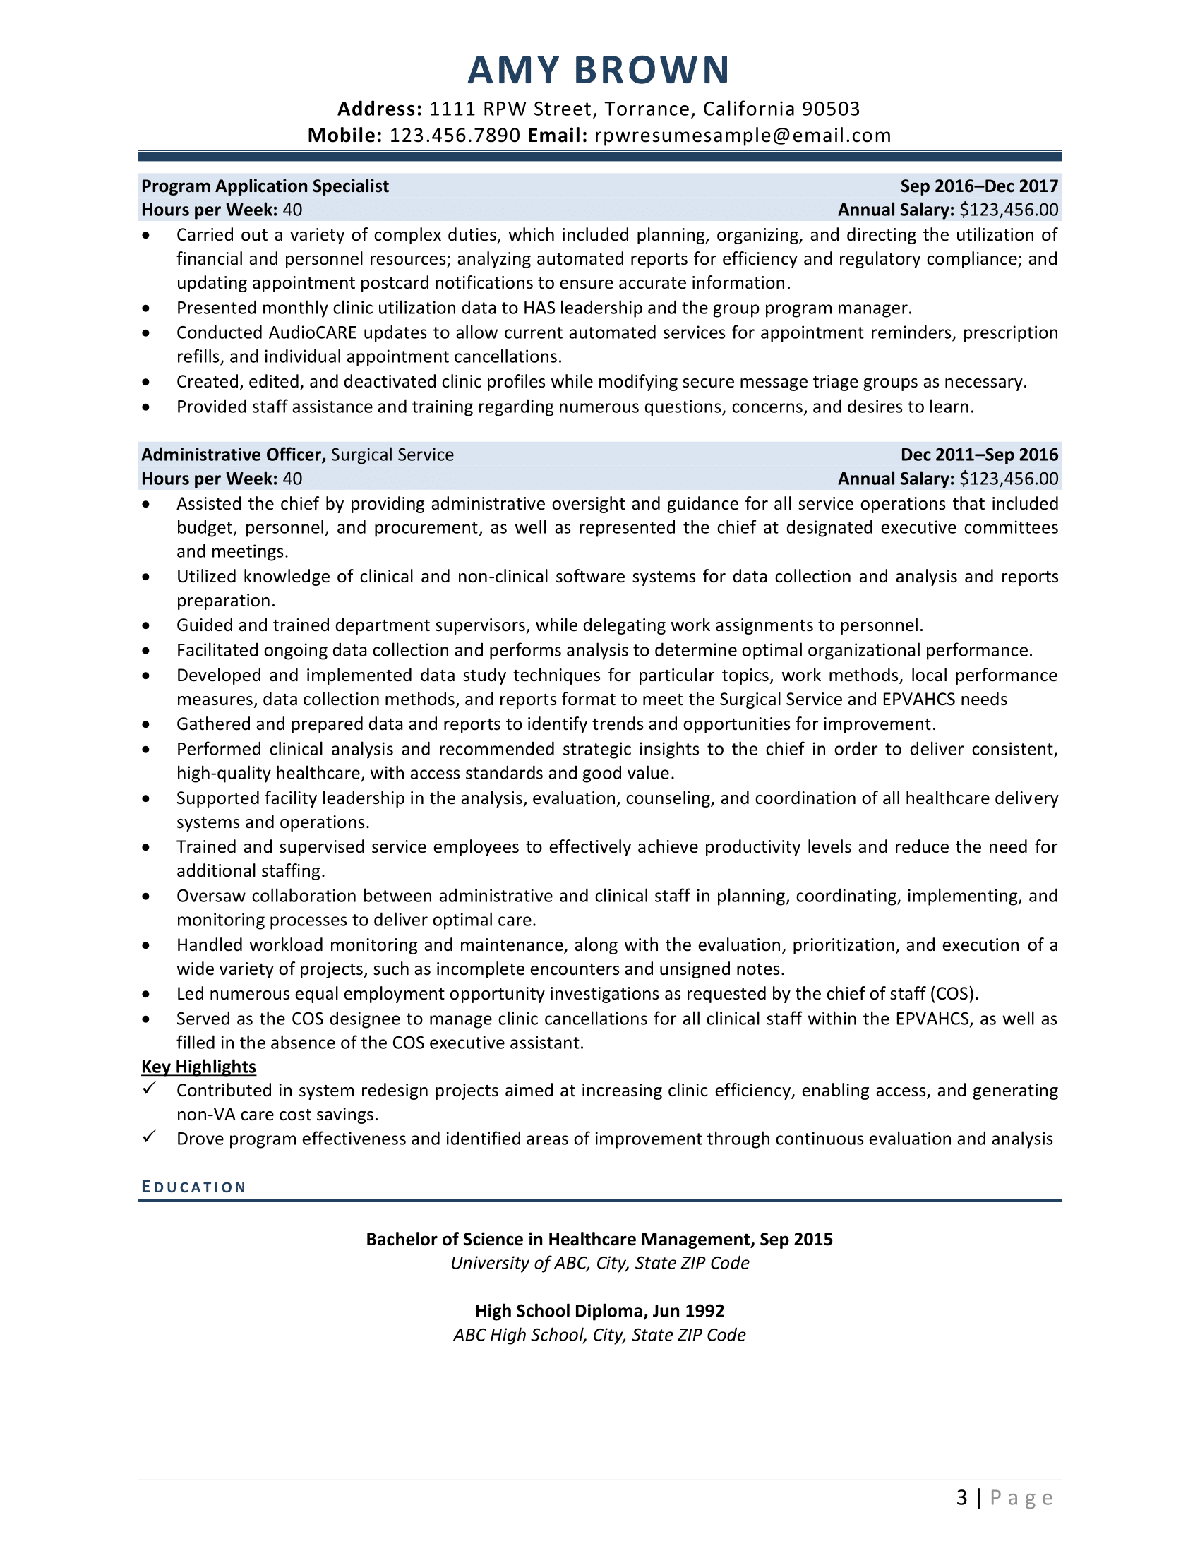 Health Systems Specialist Federal Resume Example Page 3